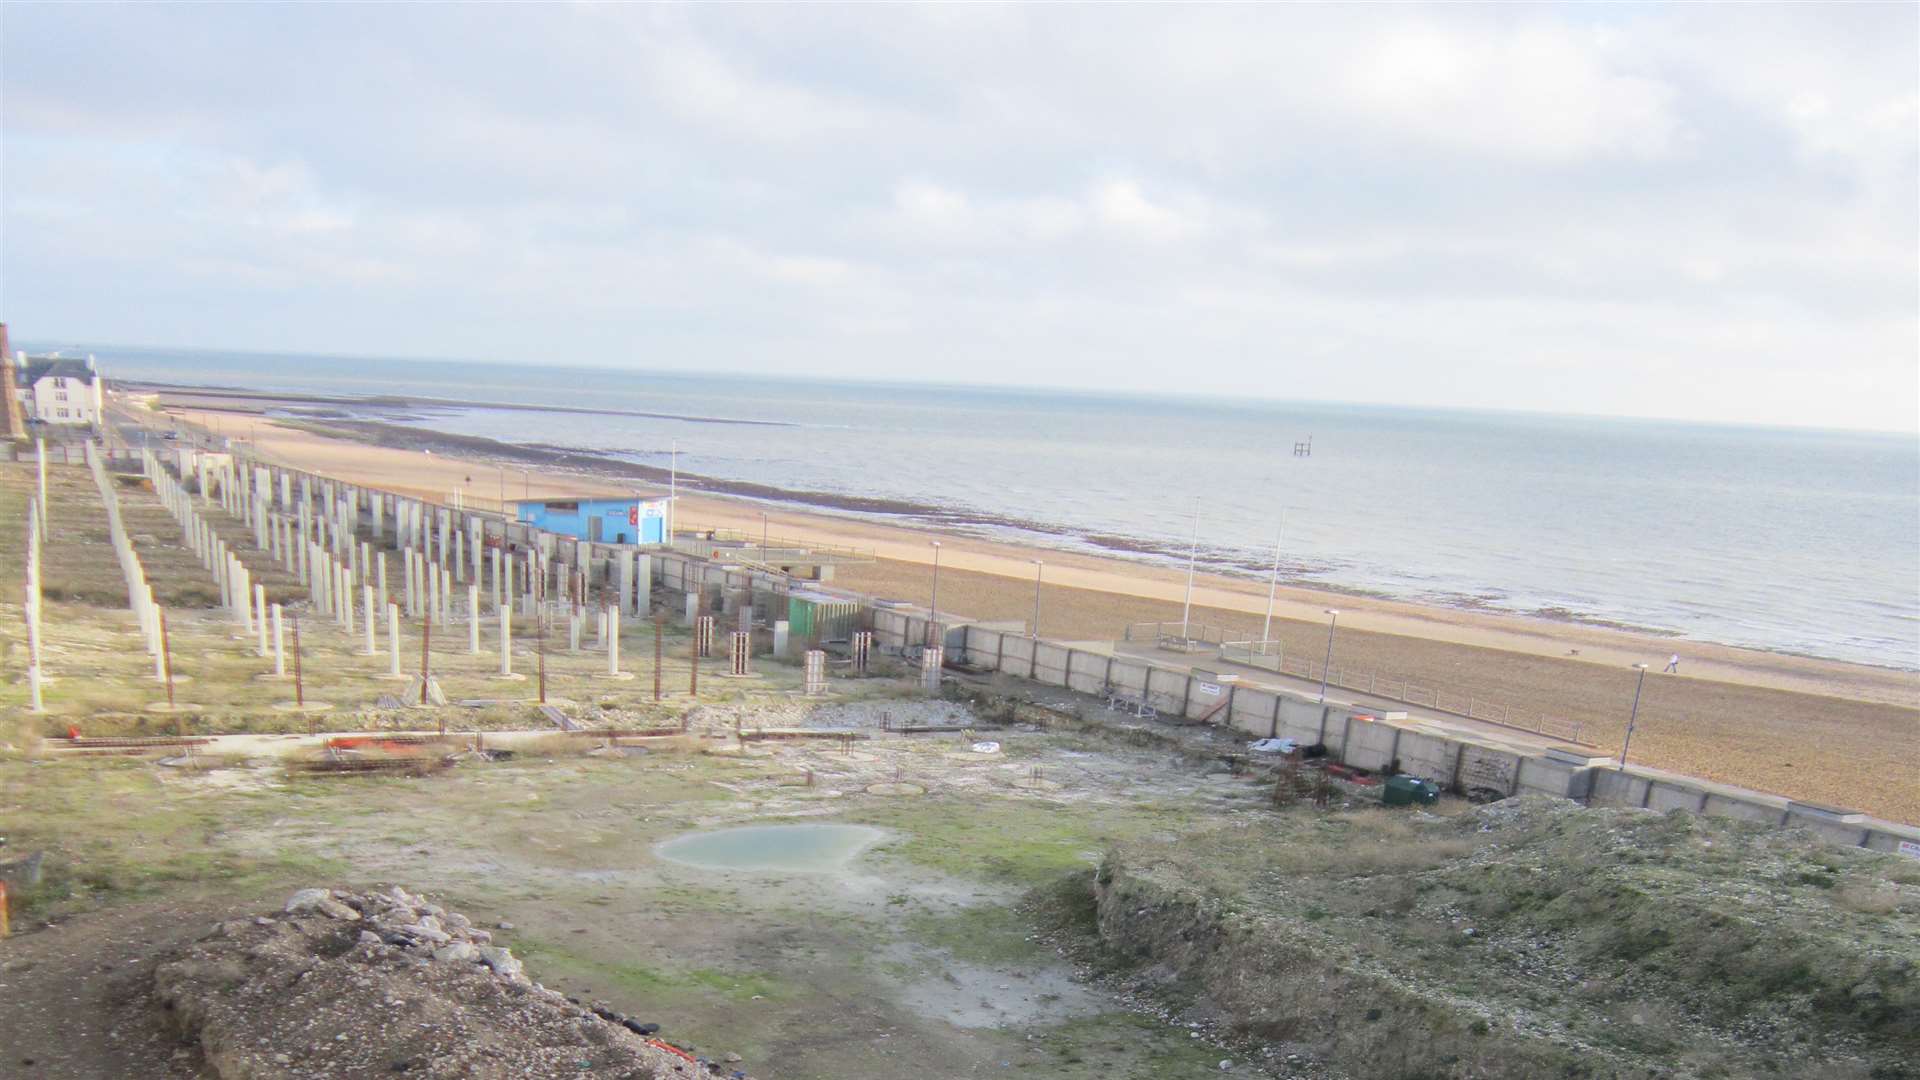 Half-finished foundations at the derelict site on Ramsgate seafront